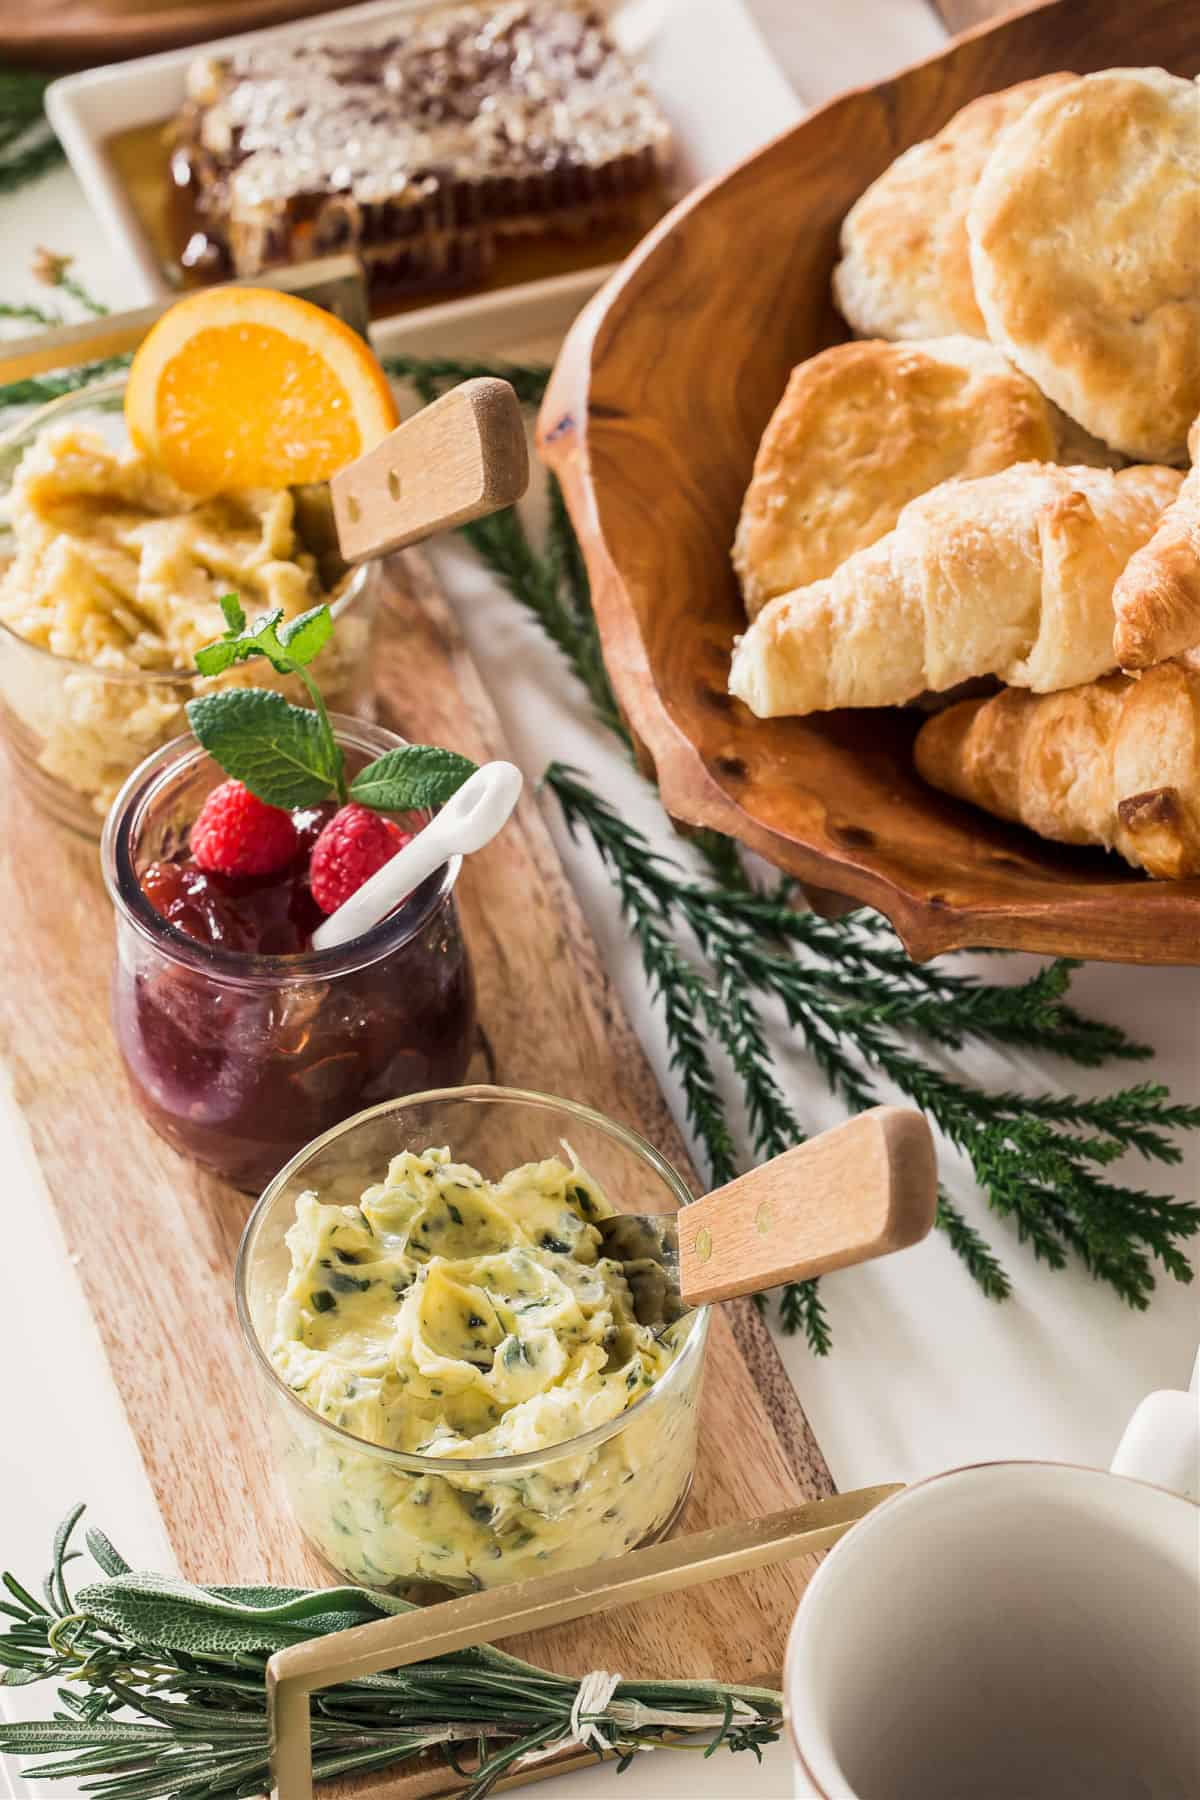 compound butter and jam on table with croissants and biscuits